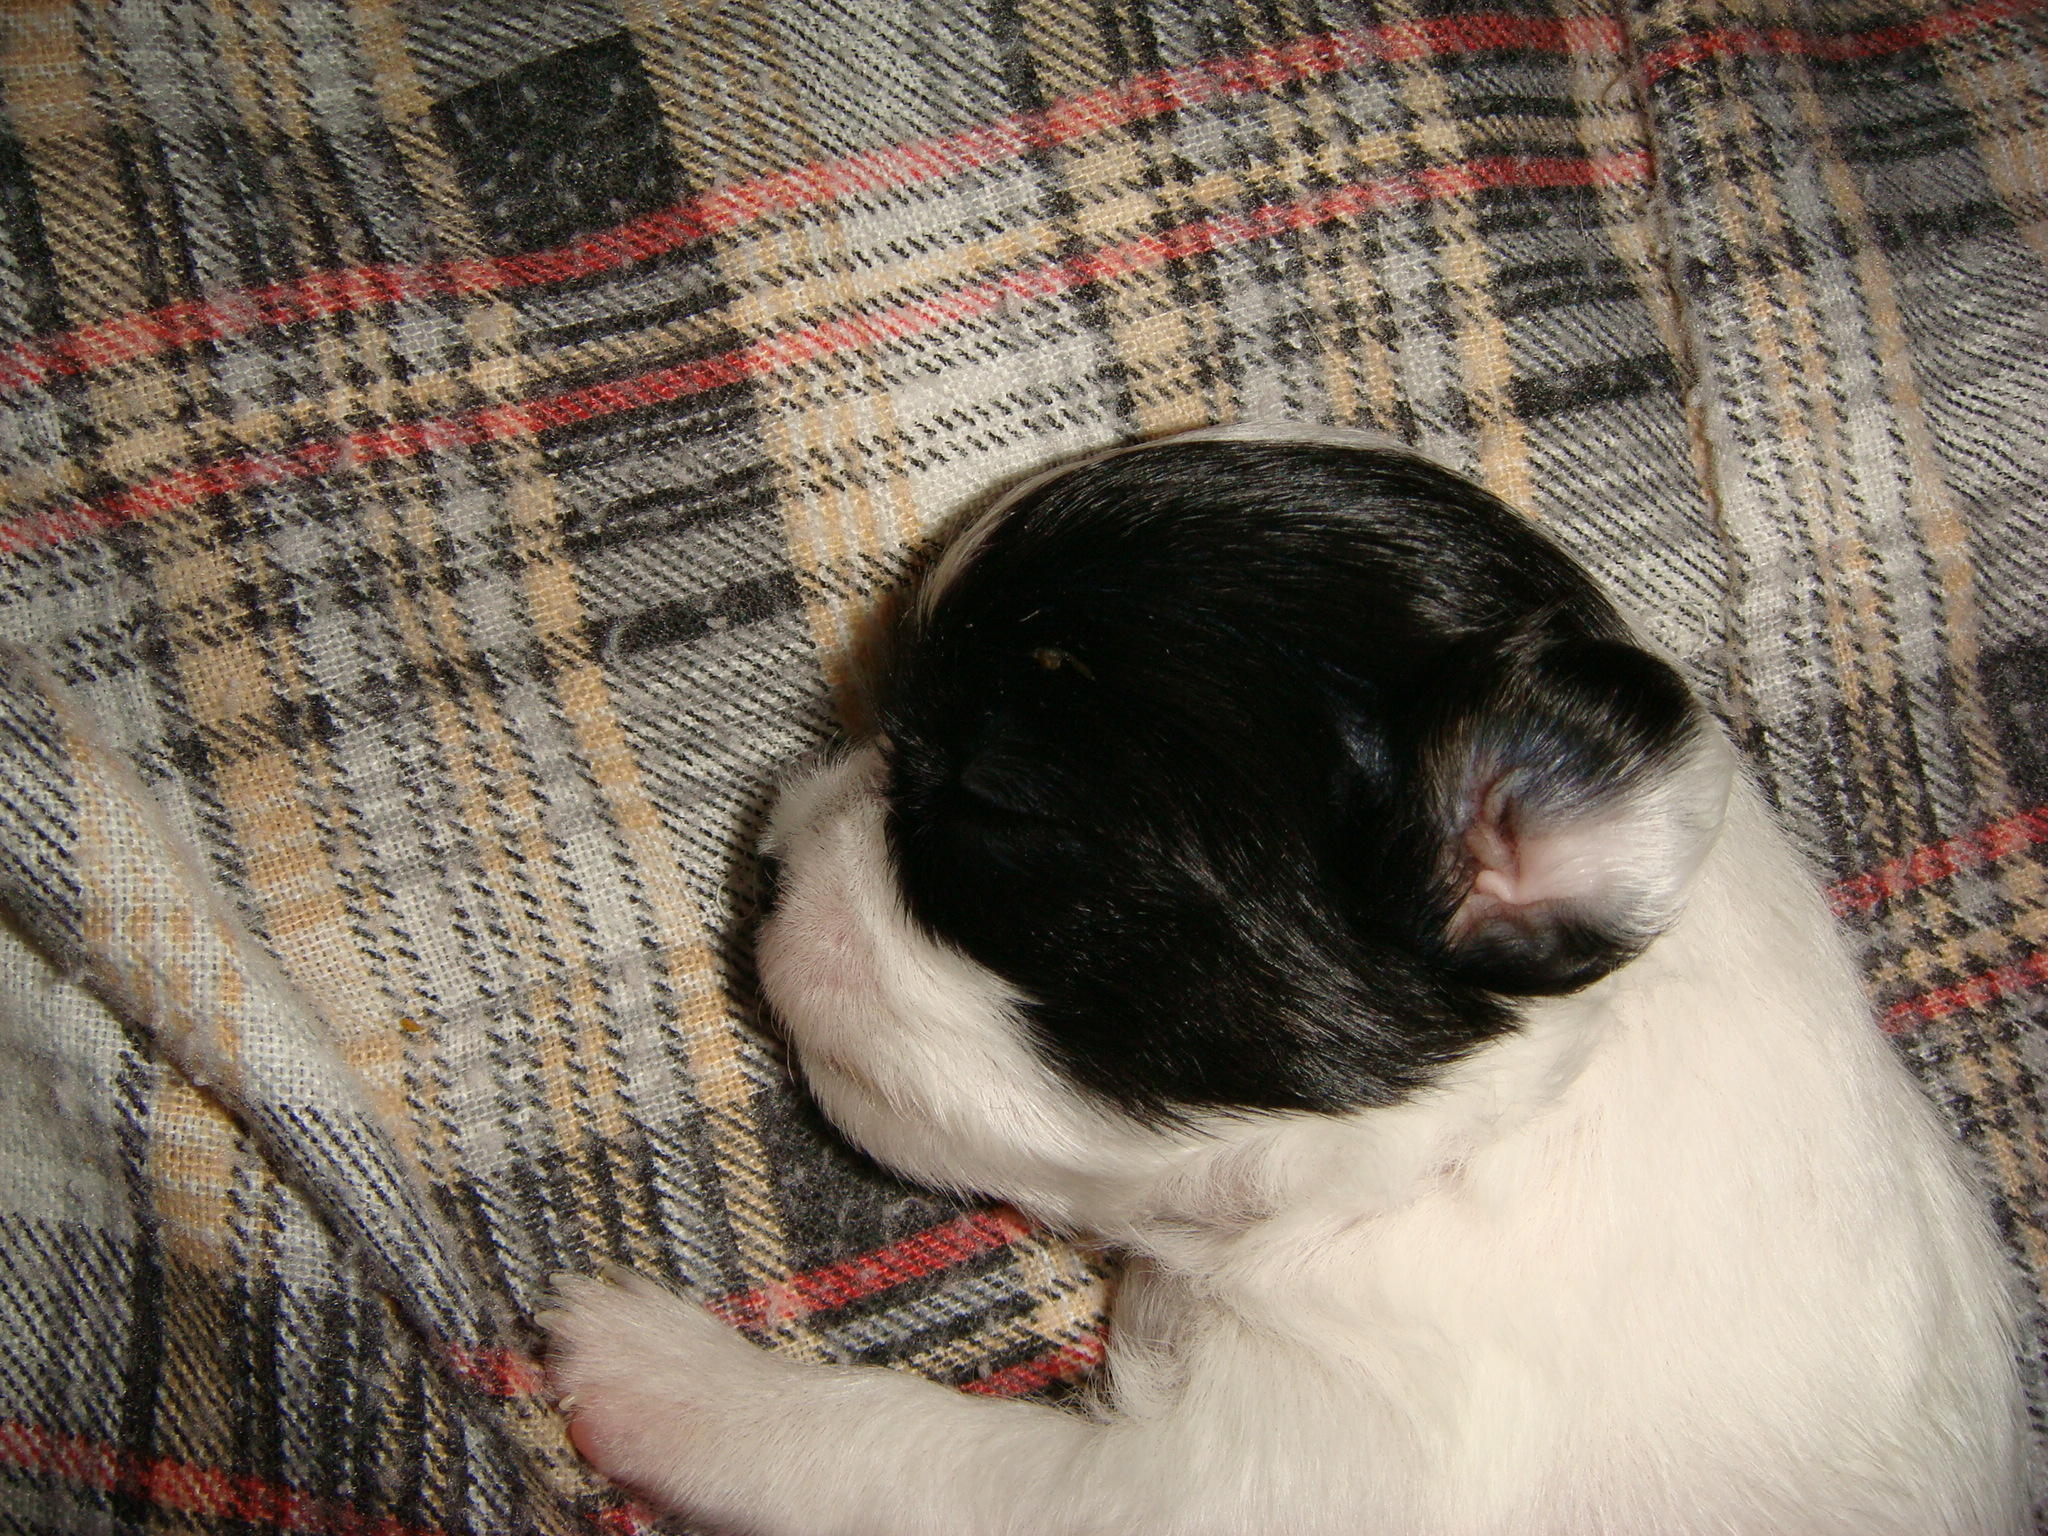 18 days old